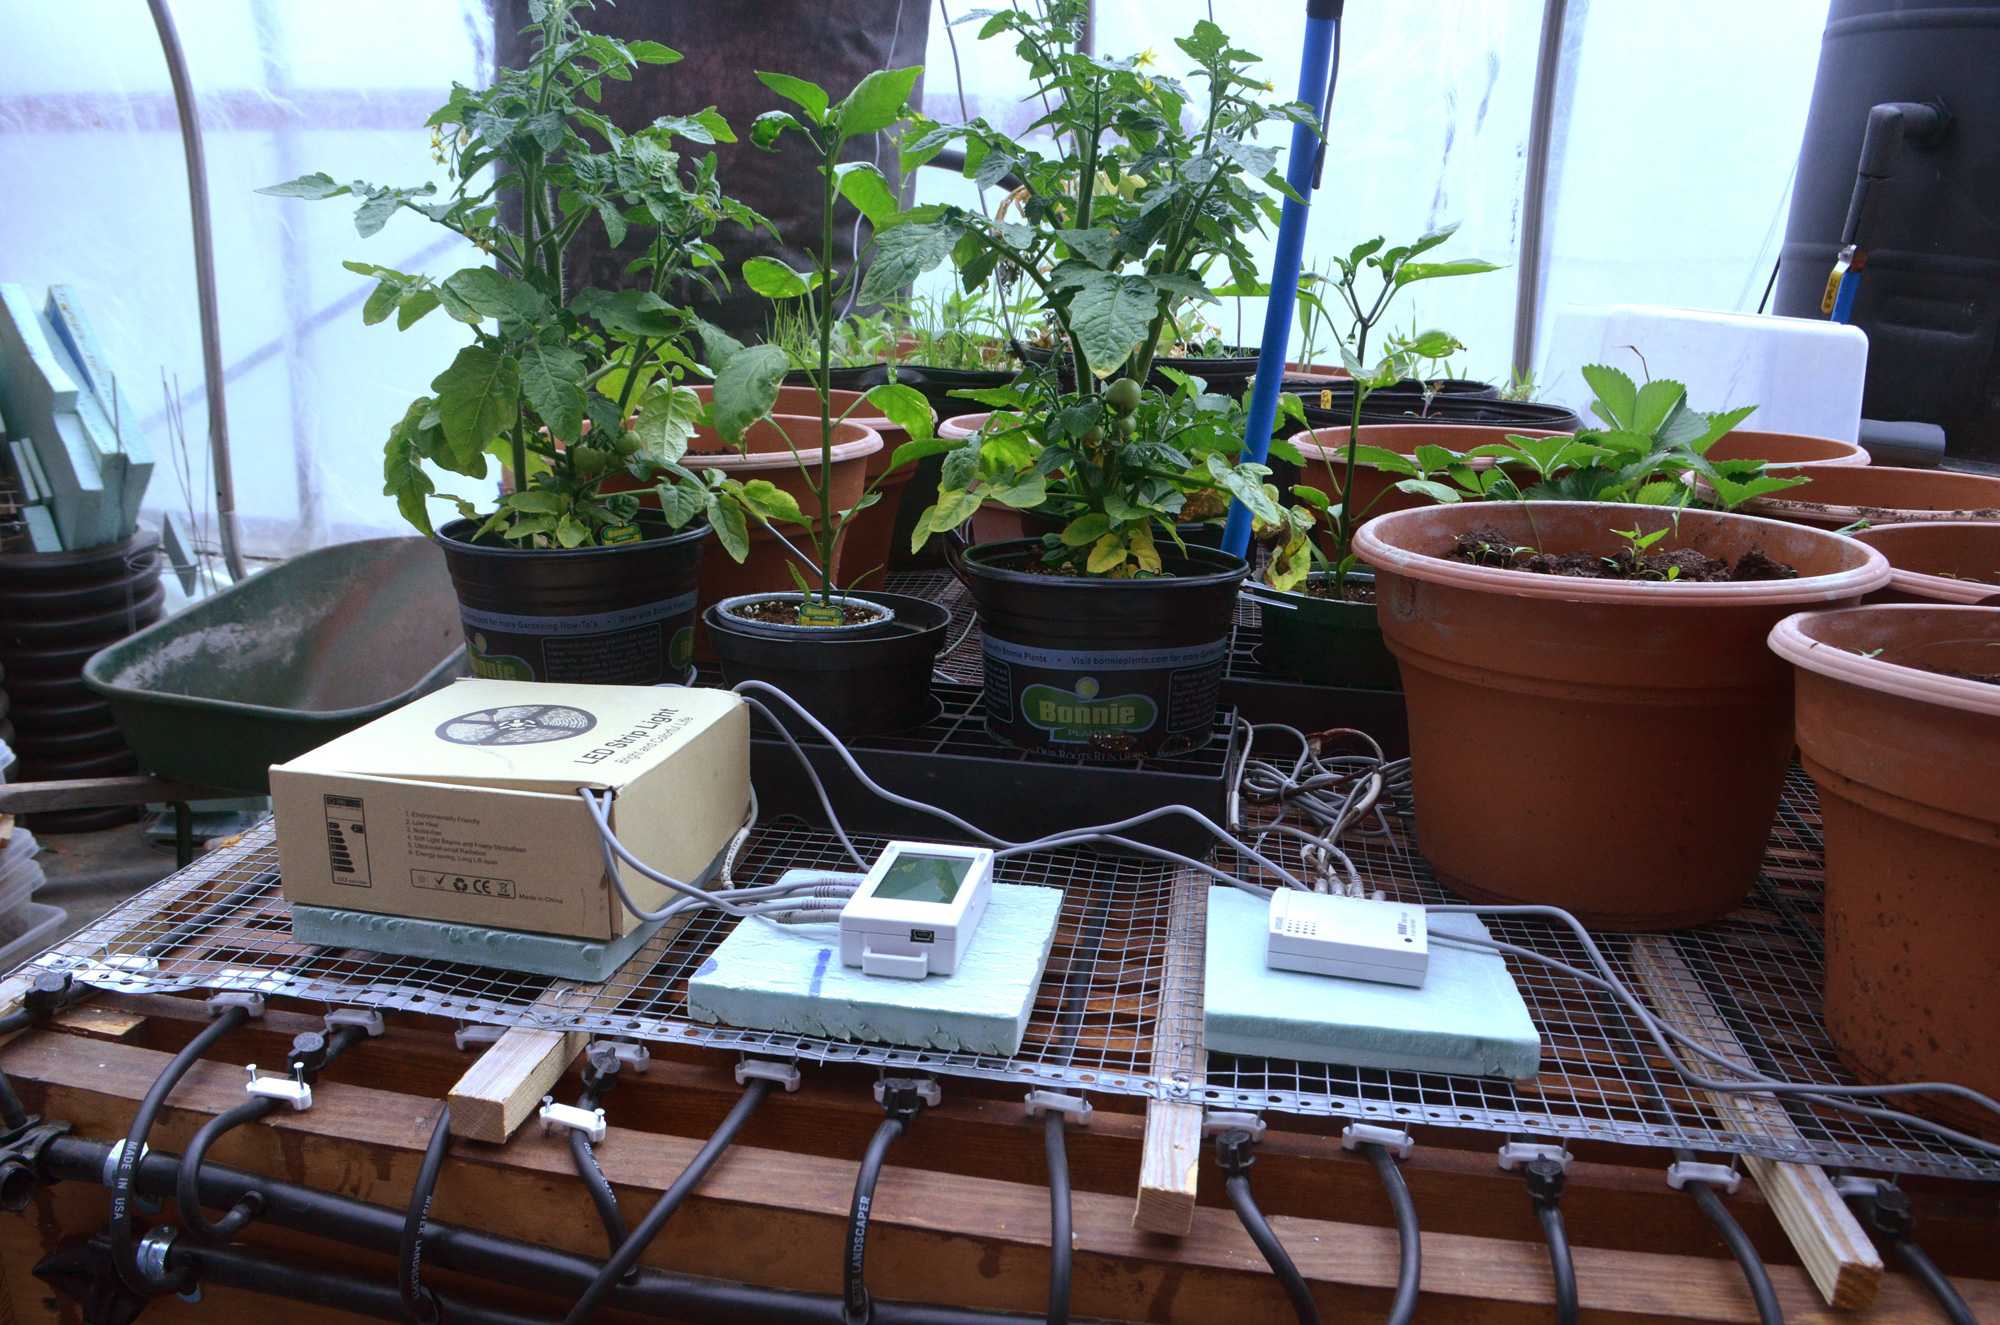 These+devices+are+designed+to+measure+plant+growth.+Data+collected+is+used+to+determine+the+best+conditions+for+growing+plants+during+the+winter+months.